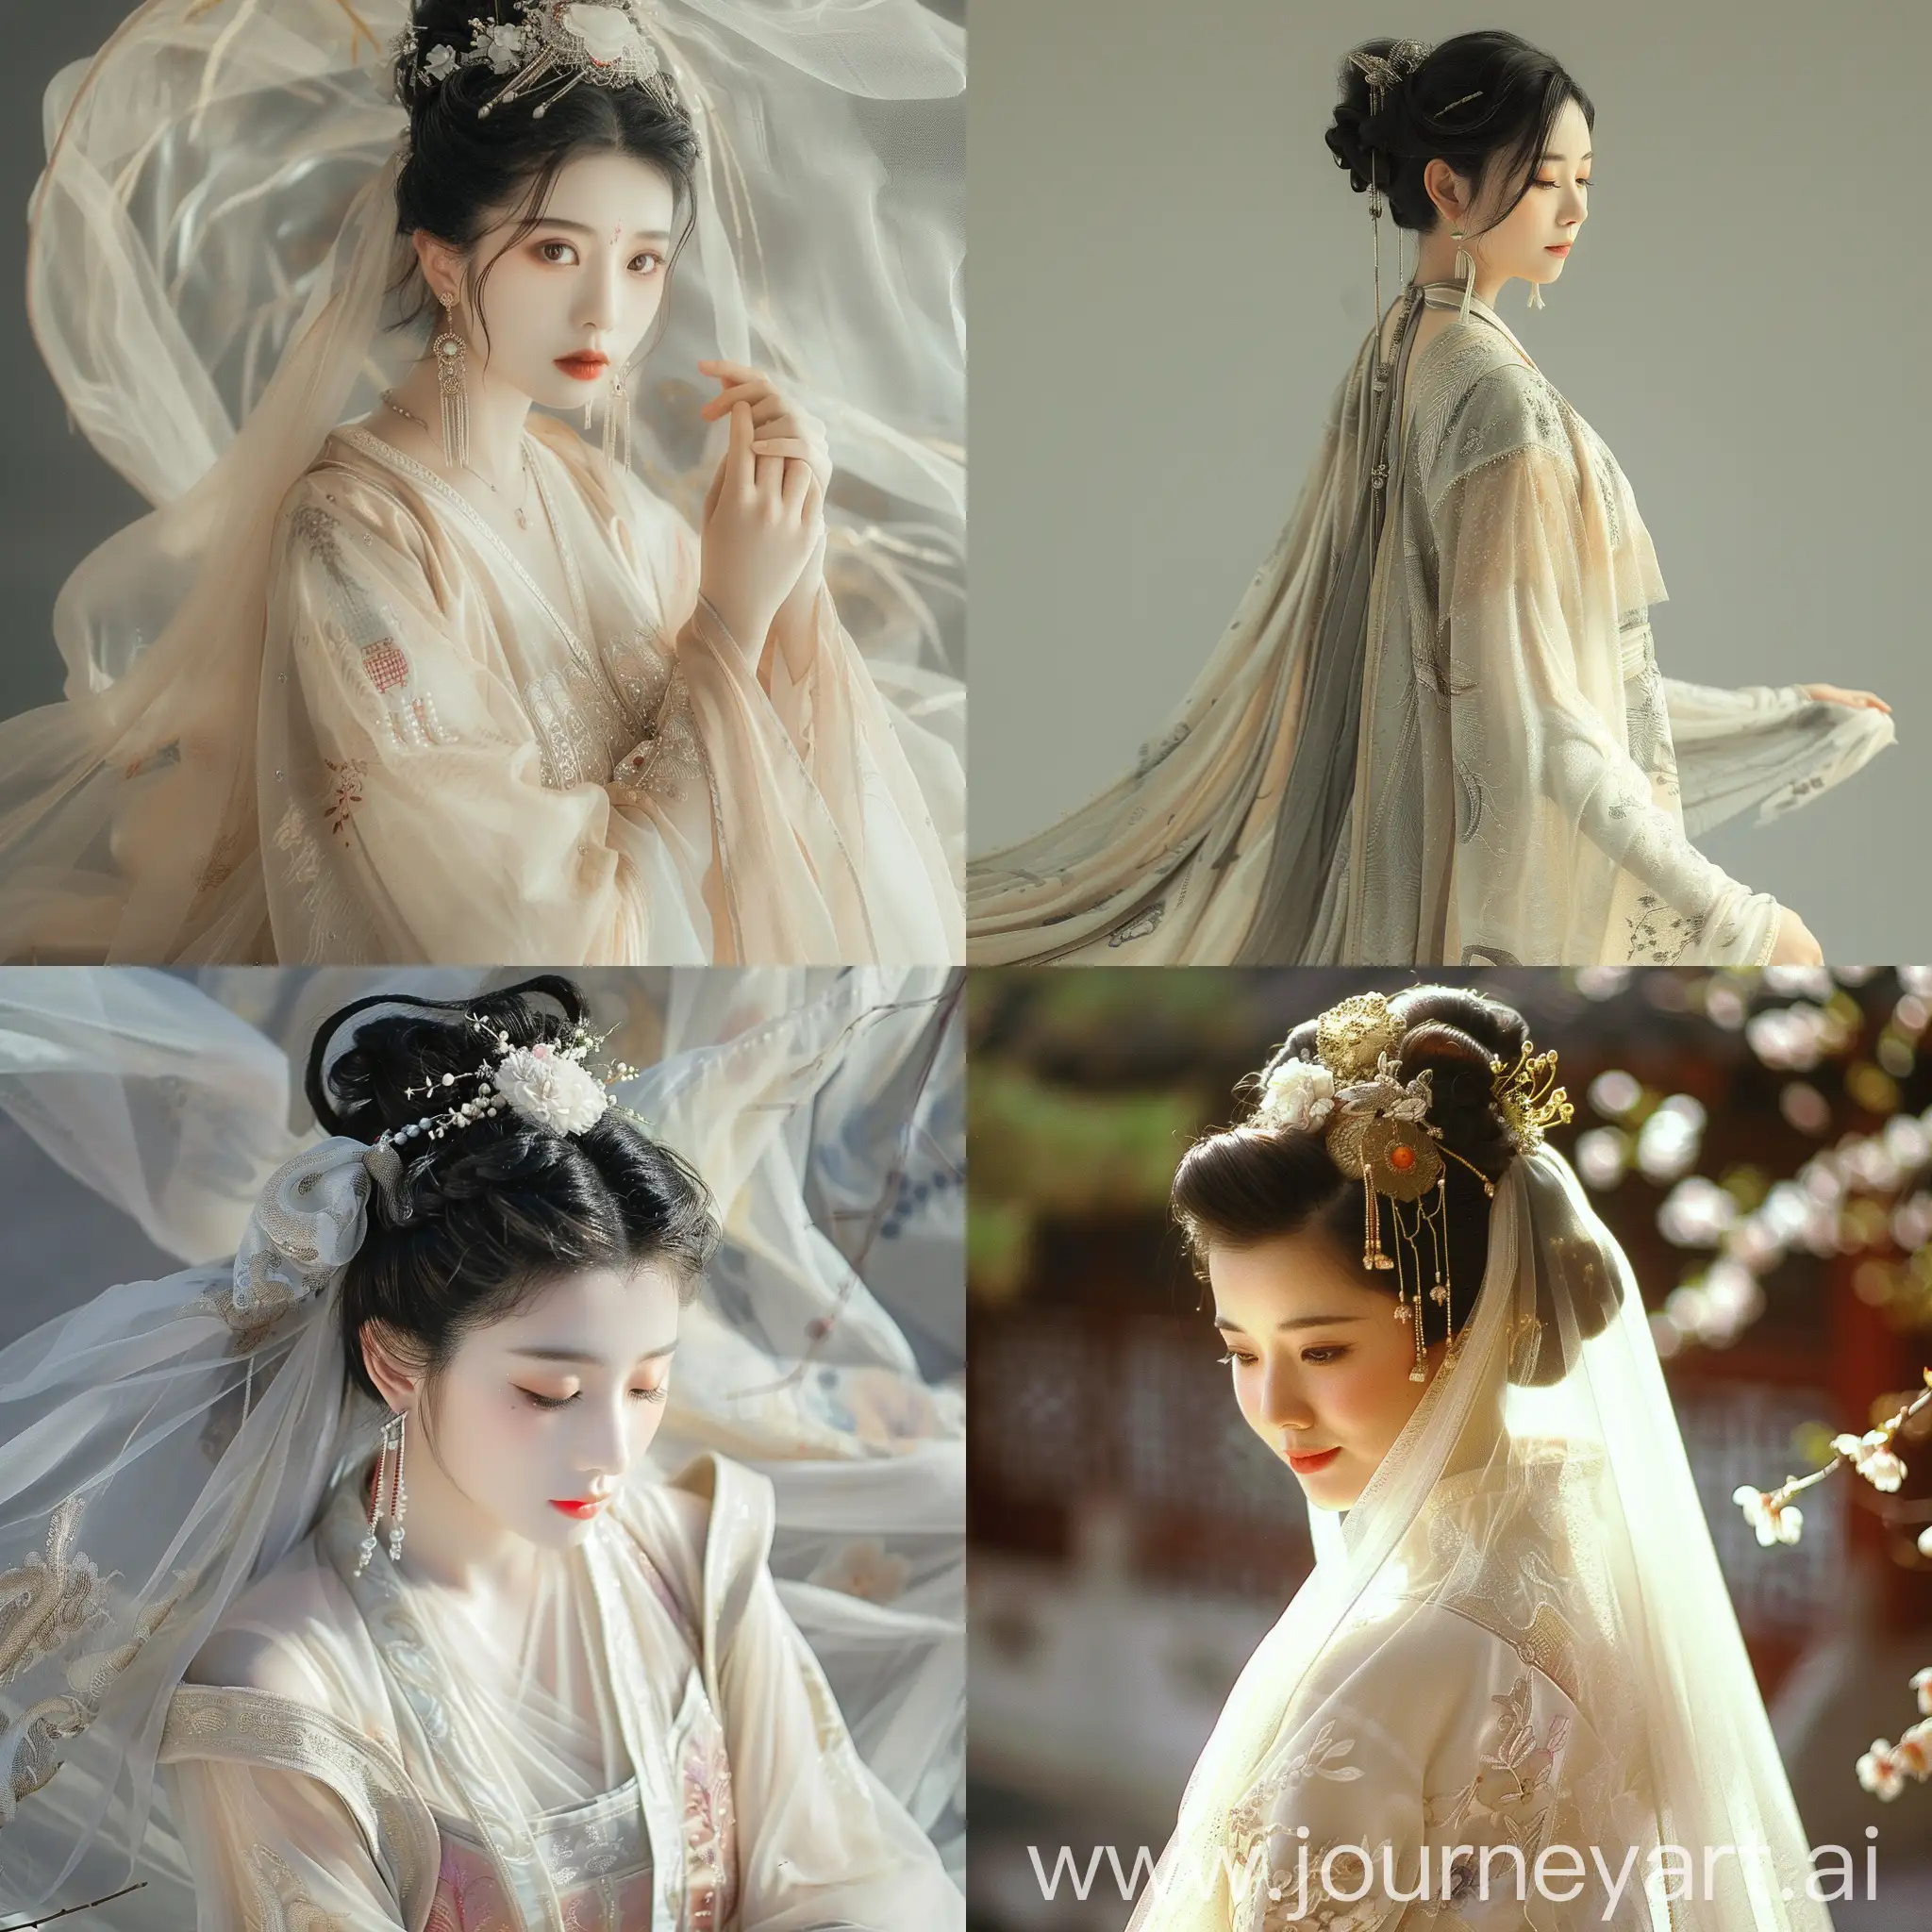 Ethereal-Chinese-Ancient-Beauty-in-Gauzy-Attire